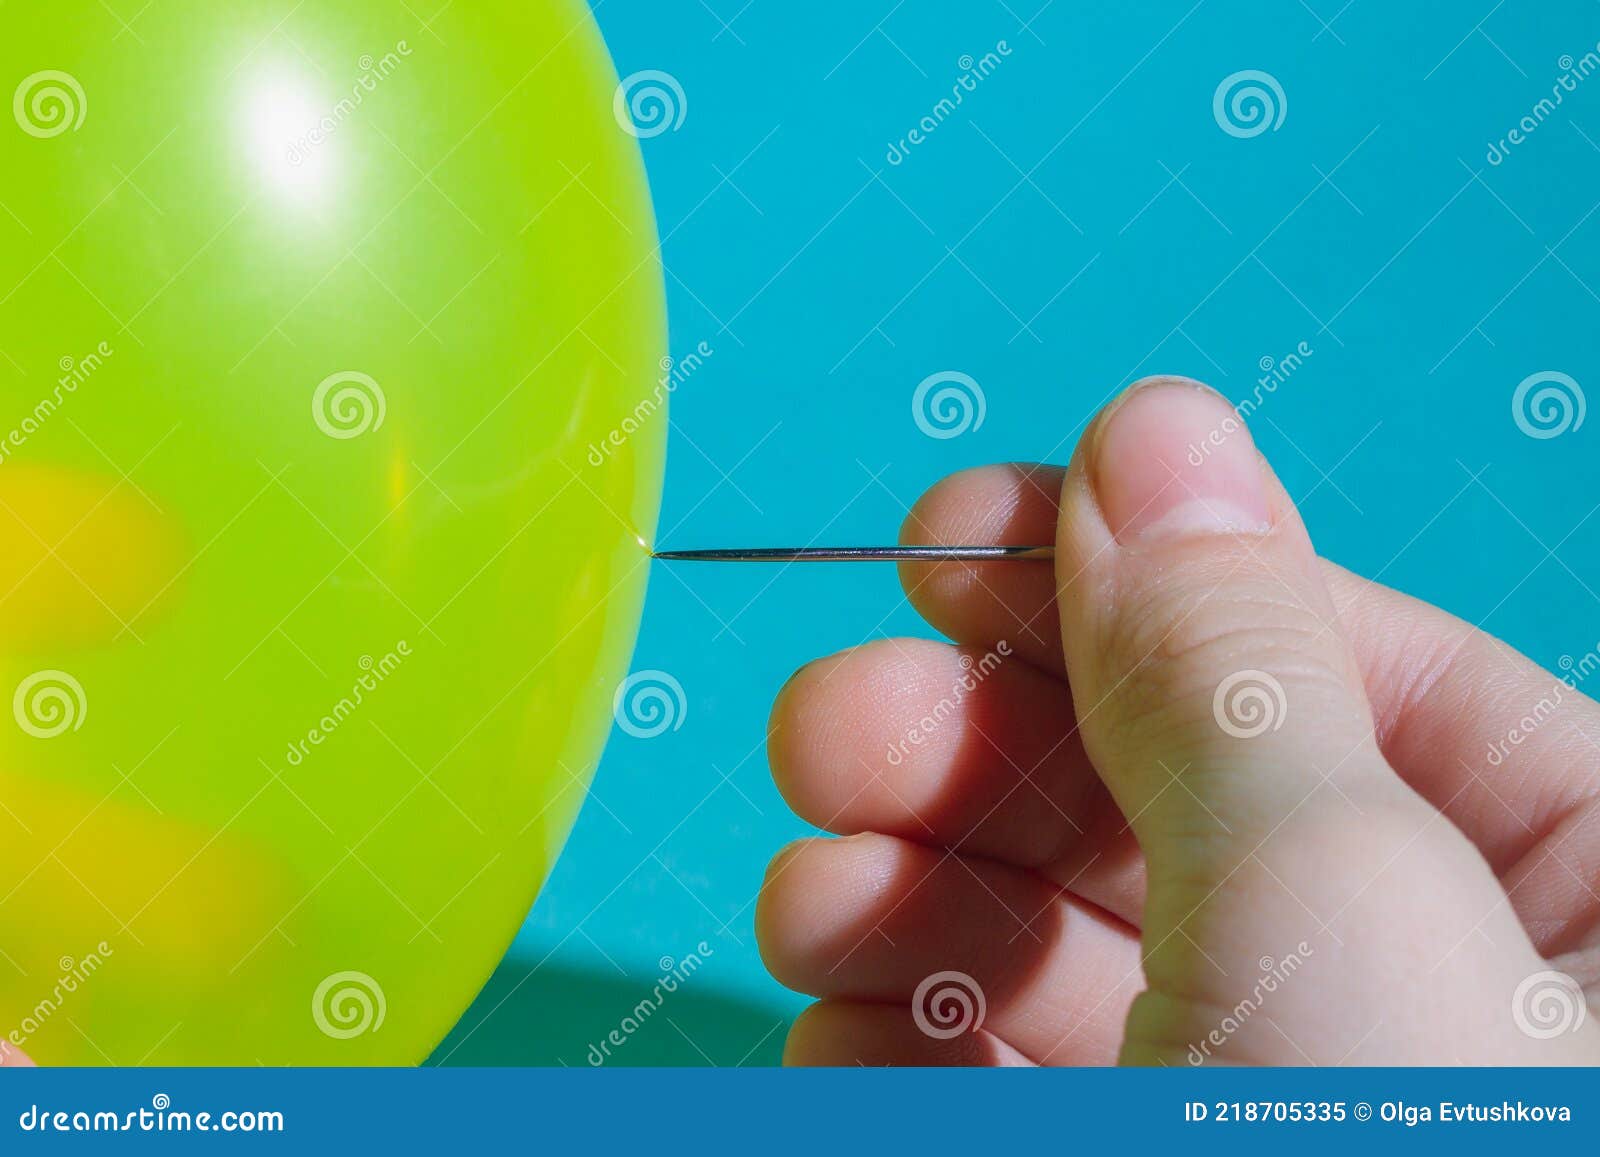 Pop the with a Sharp Hold the Sewing Needle in Your Stock Image - Image of destruction, 218705335